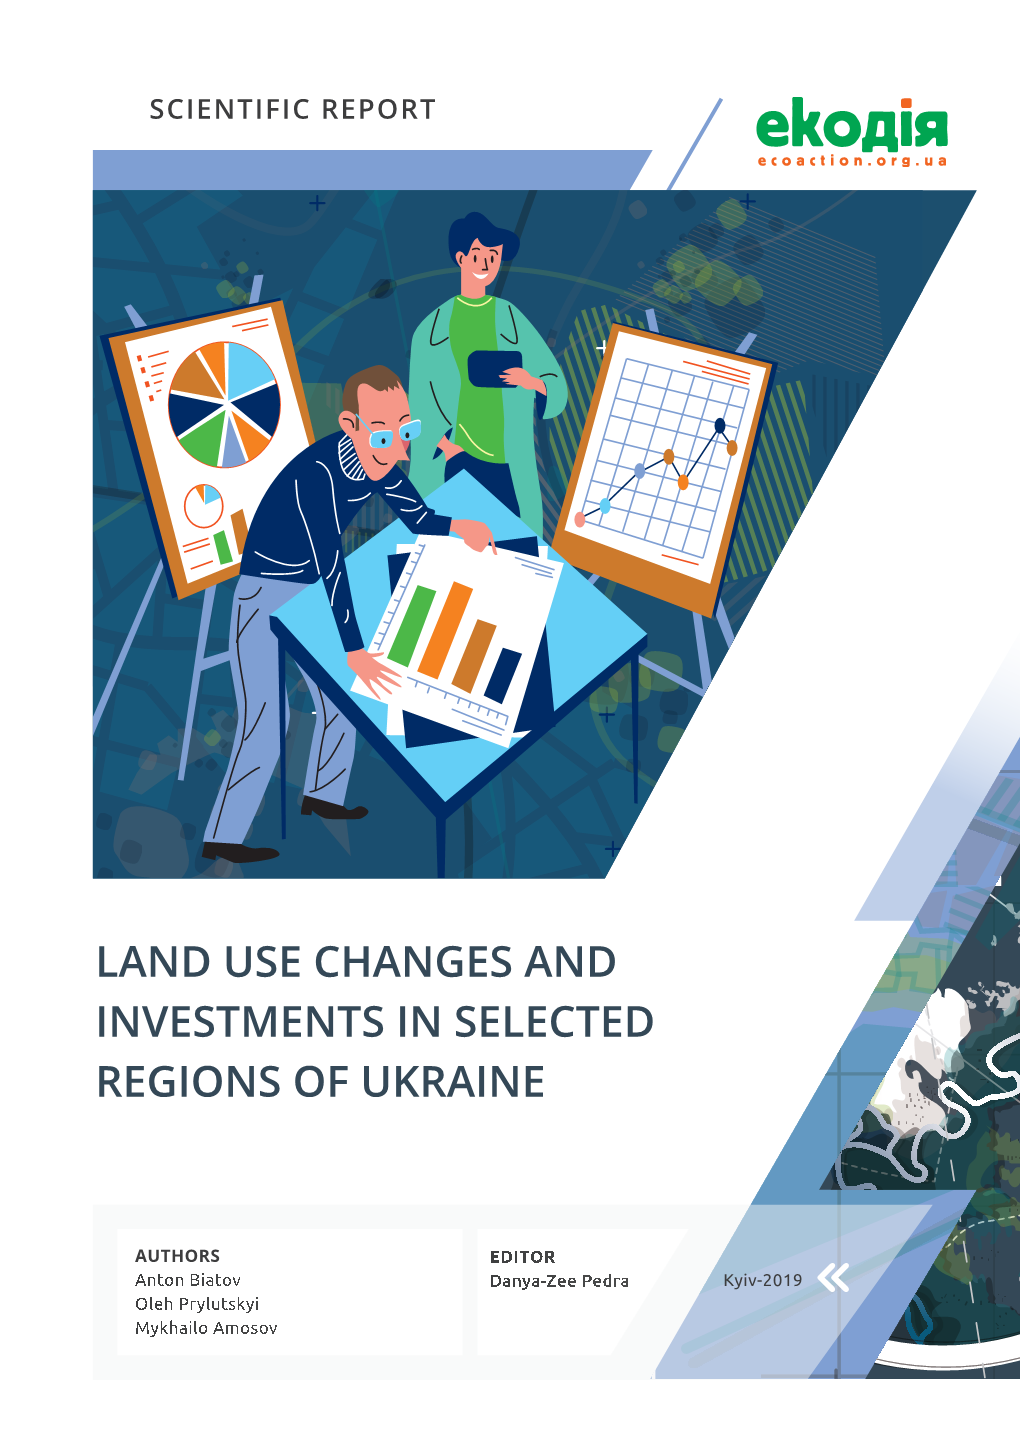 Scientific Report “Land Use Changes and Investments in Selected Regions